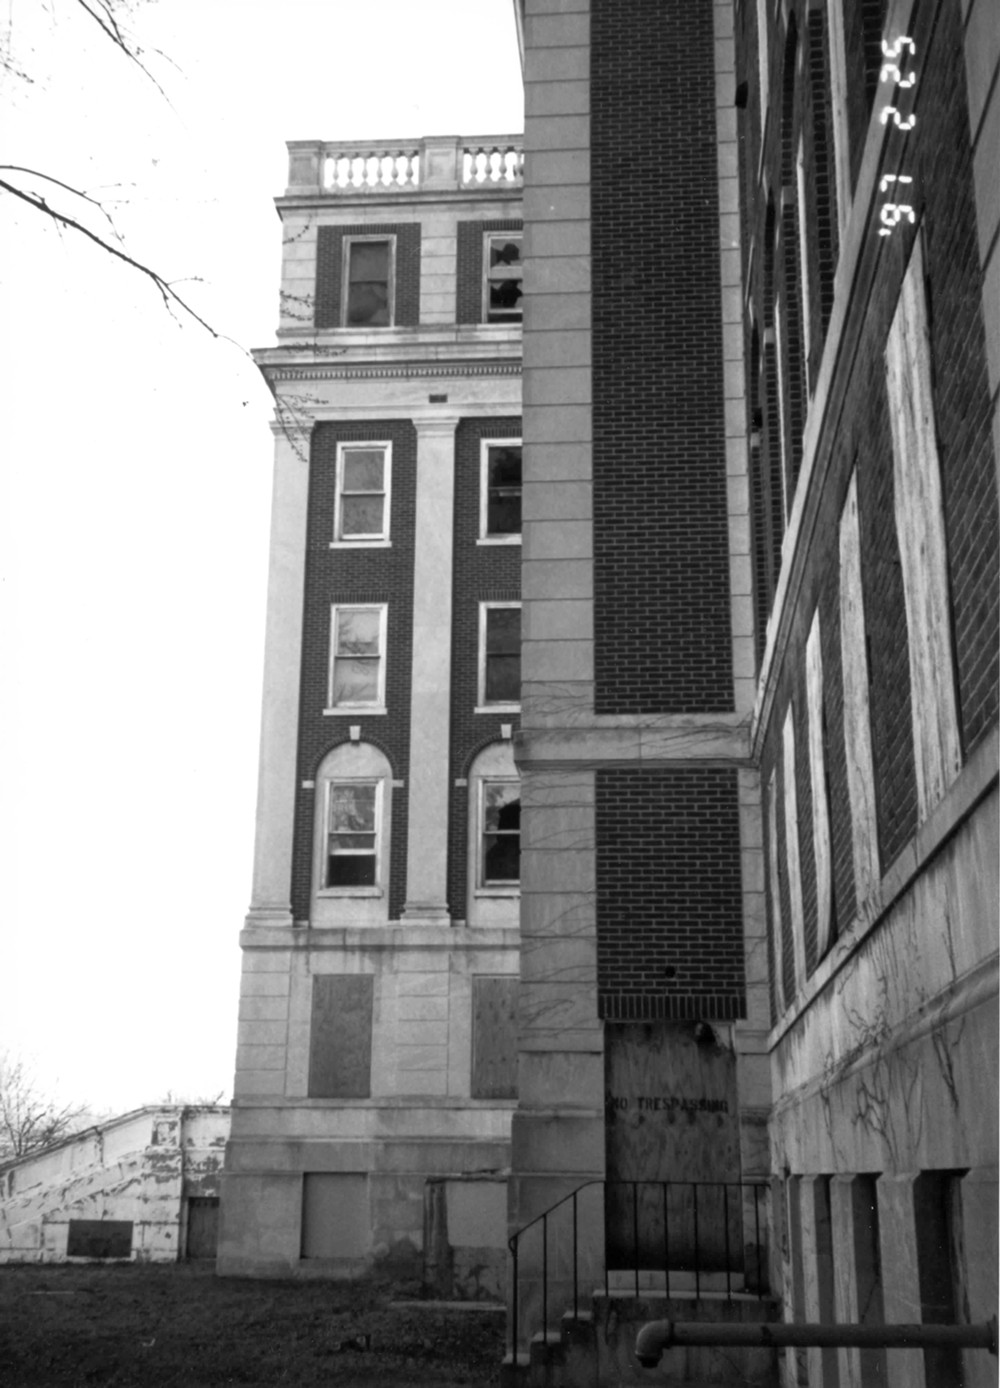 Lucas County Hospital and Nurse's Home, Toledo Ohio Hospital facade detail, looking east from western end of facade (1997)